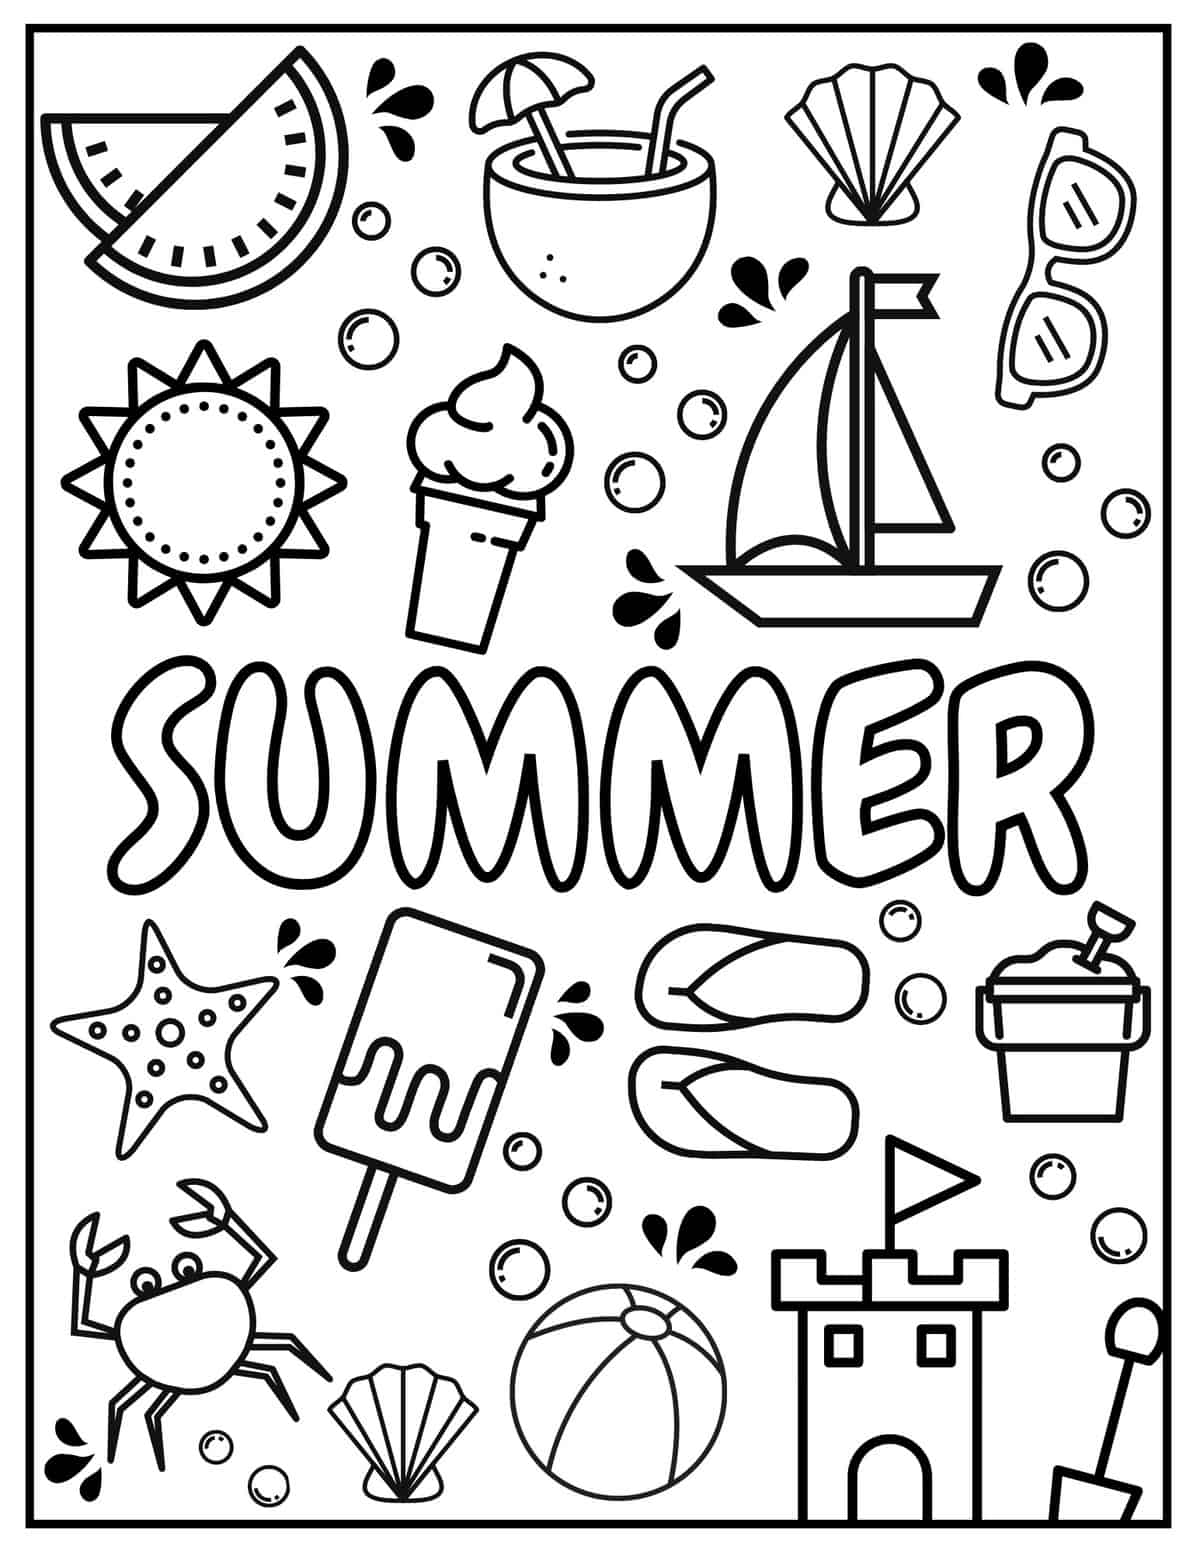 free-summer-coloring-pages-for-kids-adults-15-free-summer-coloring